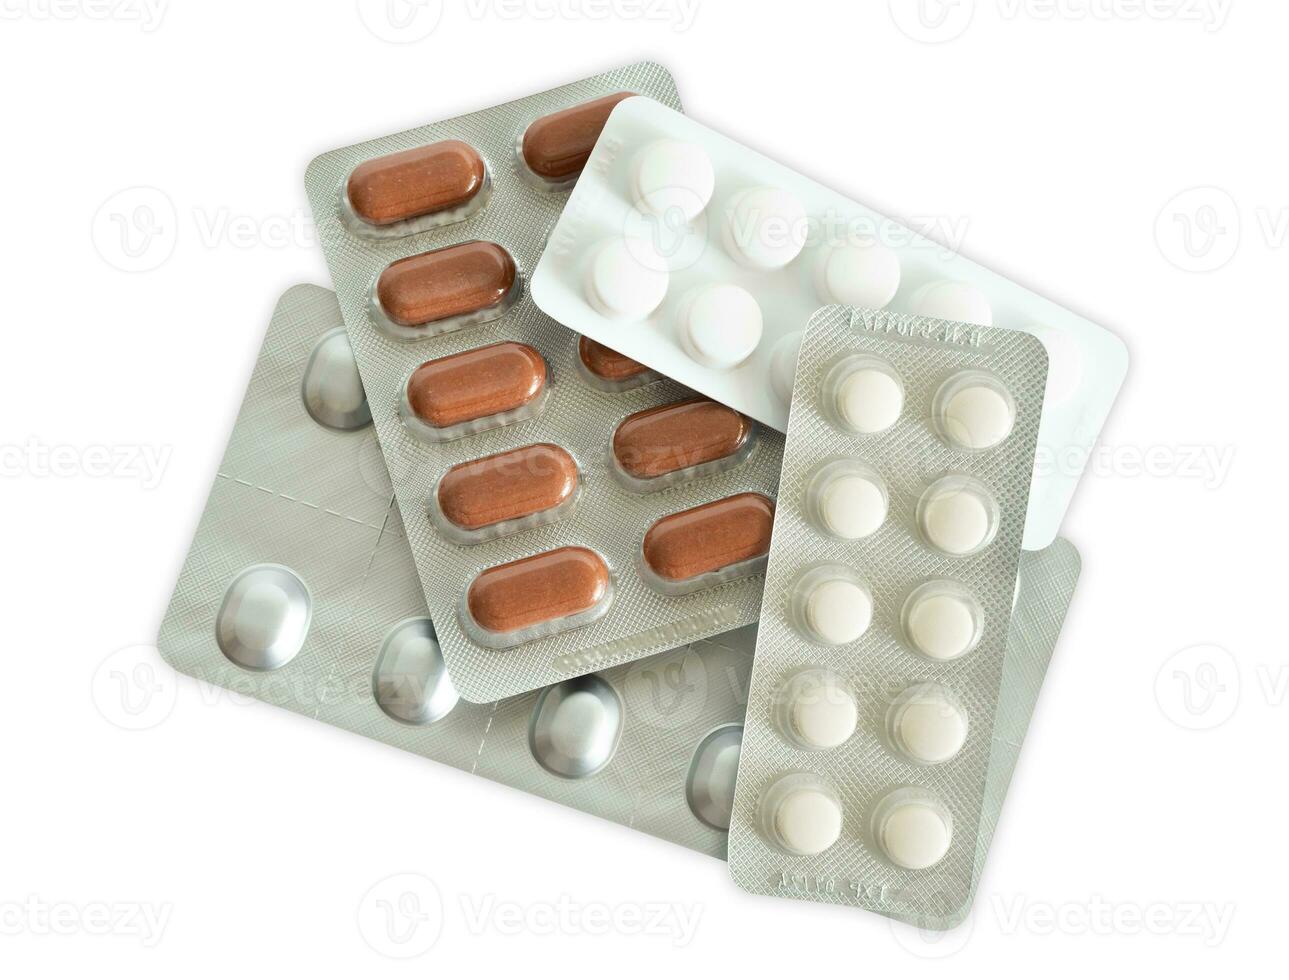 Pills, medicine tablet, isolated on blank background. photo